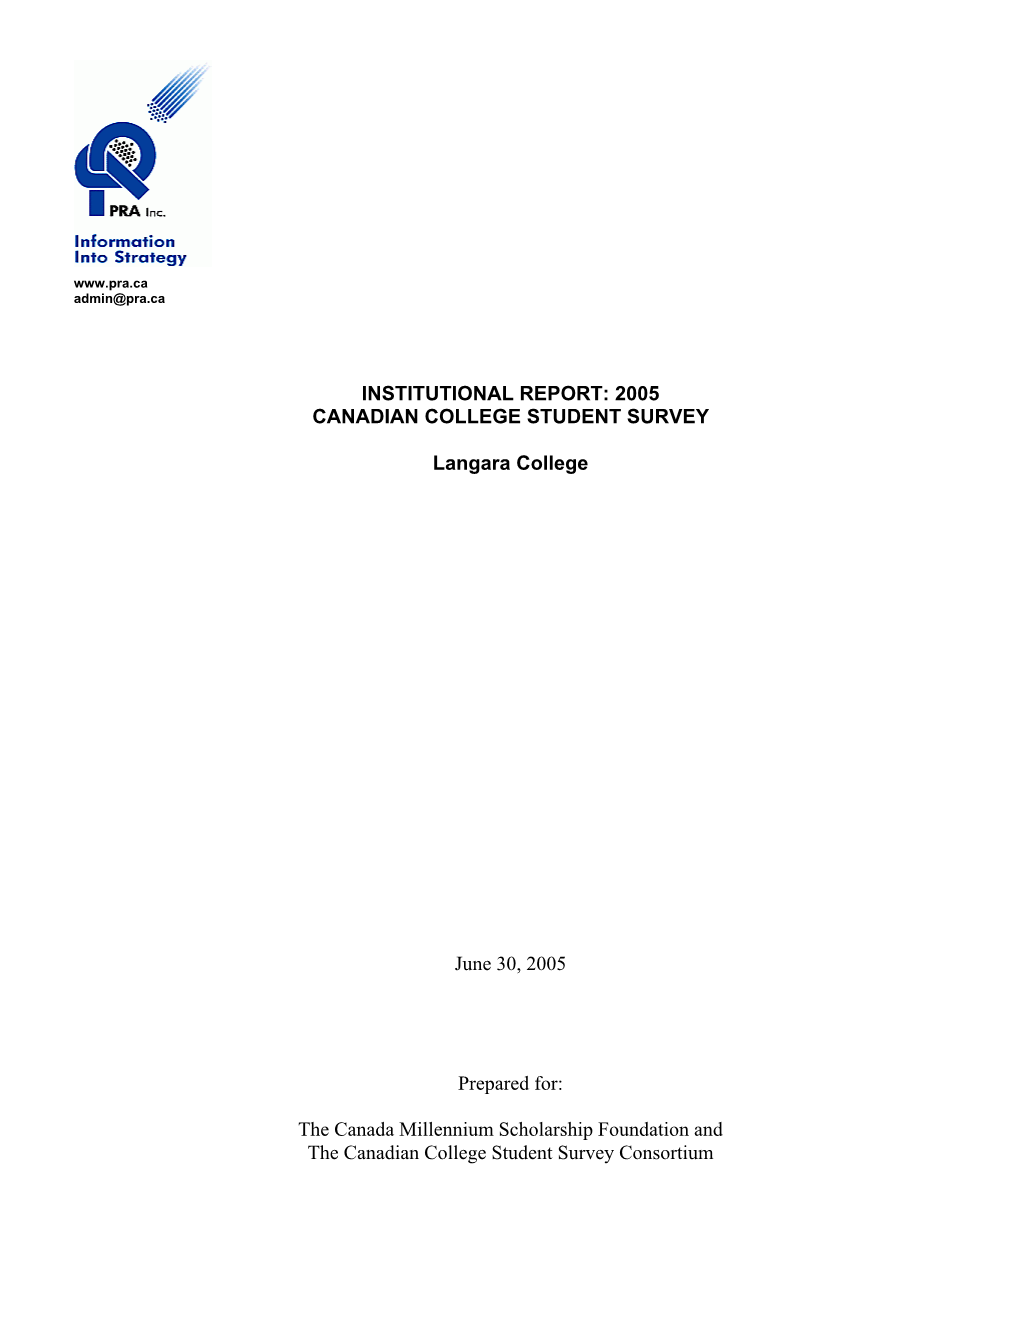 Institutional Report: 2005 Canadian College Student Survey